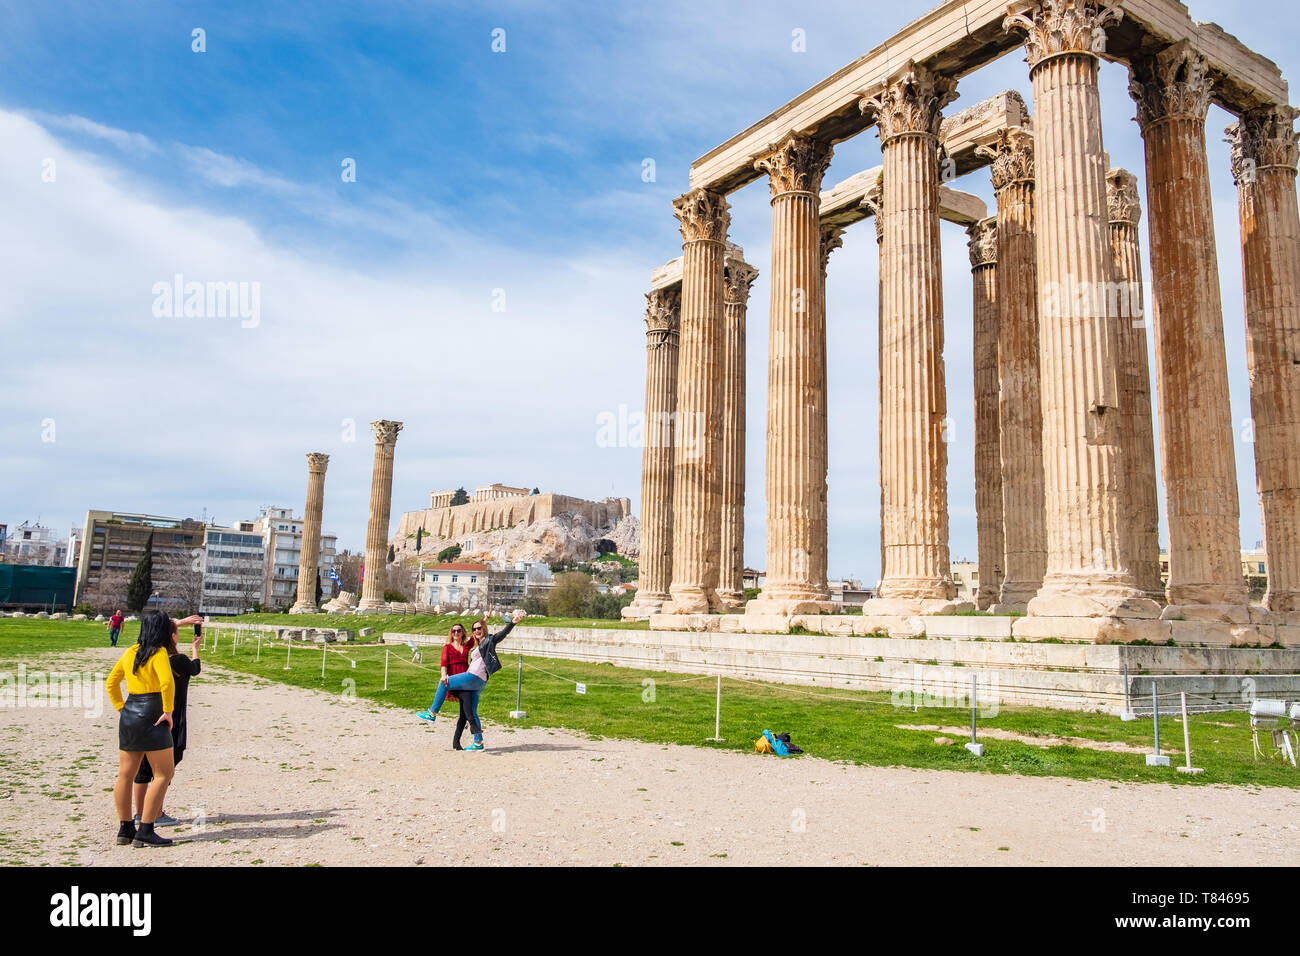 Athens, Greece - March 9, 2019: Tourists being photographed in front of the Greek Temple of Olympian Zeus with the Acropolis of Athens in the backgrou Stock Photo